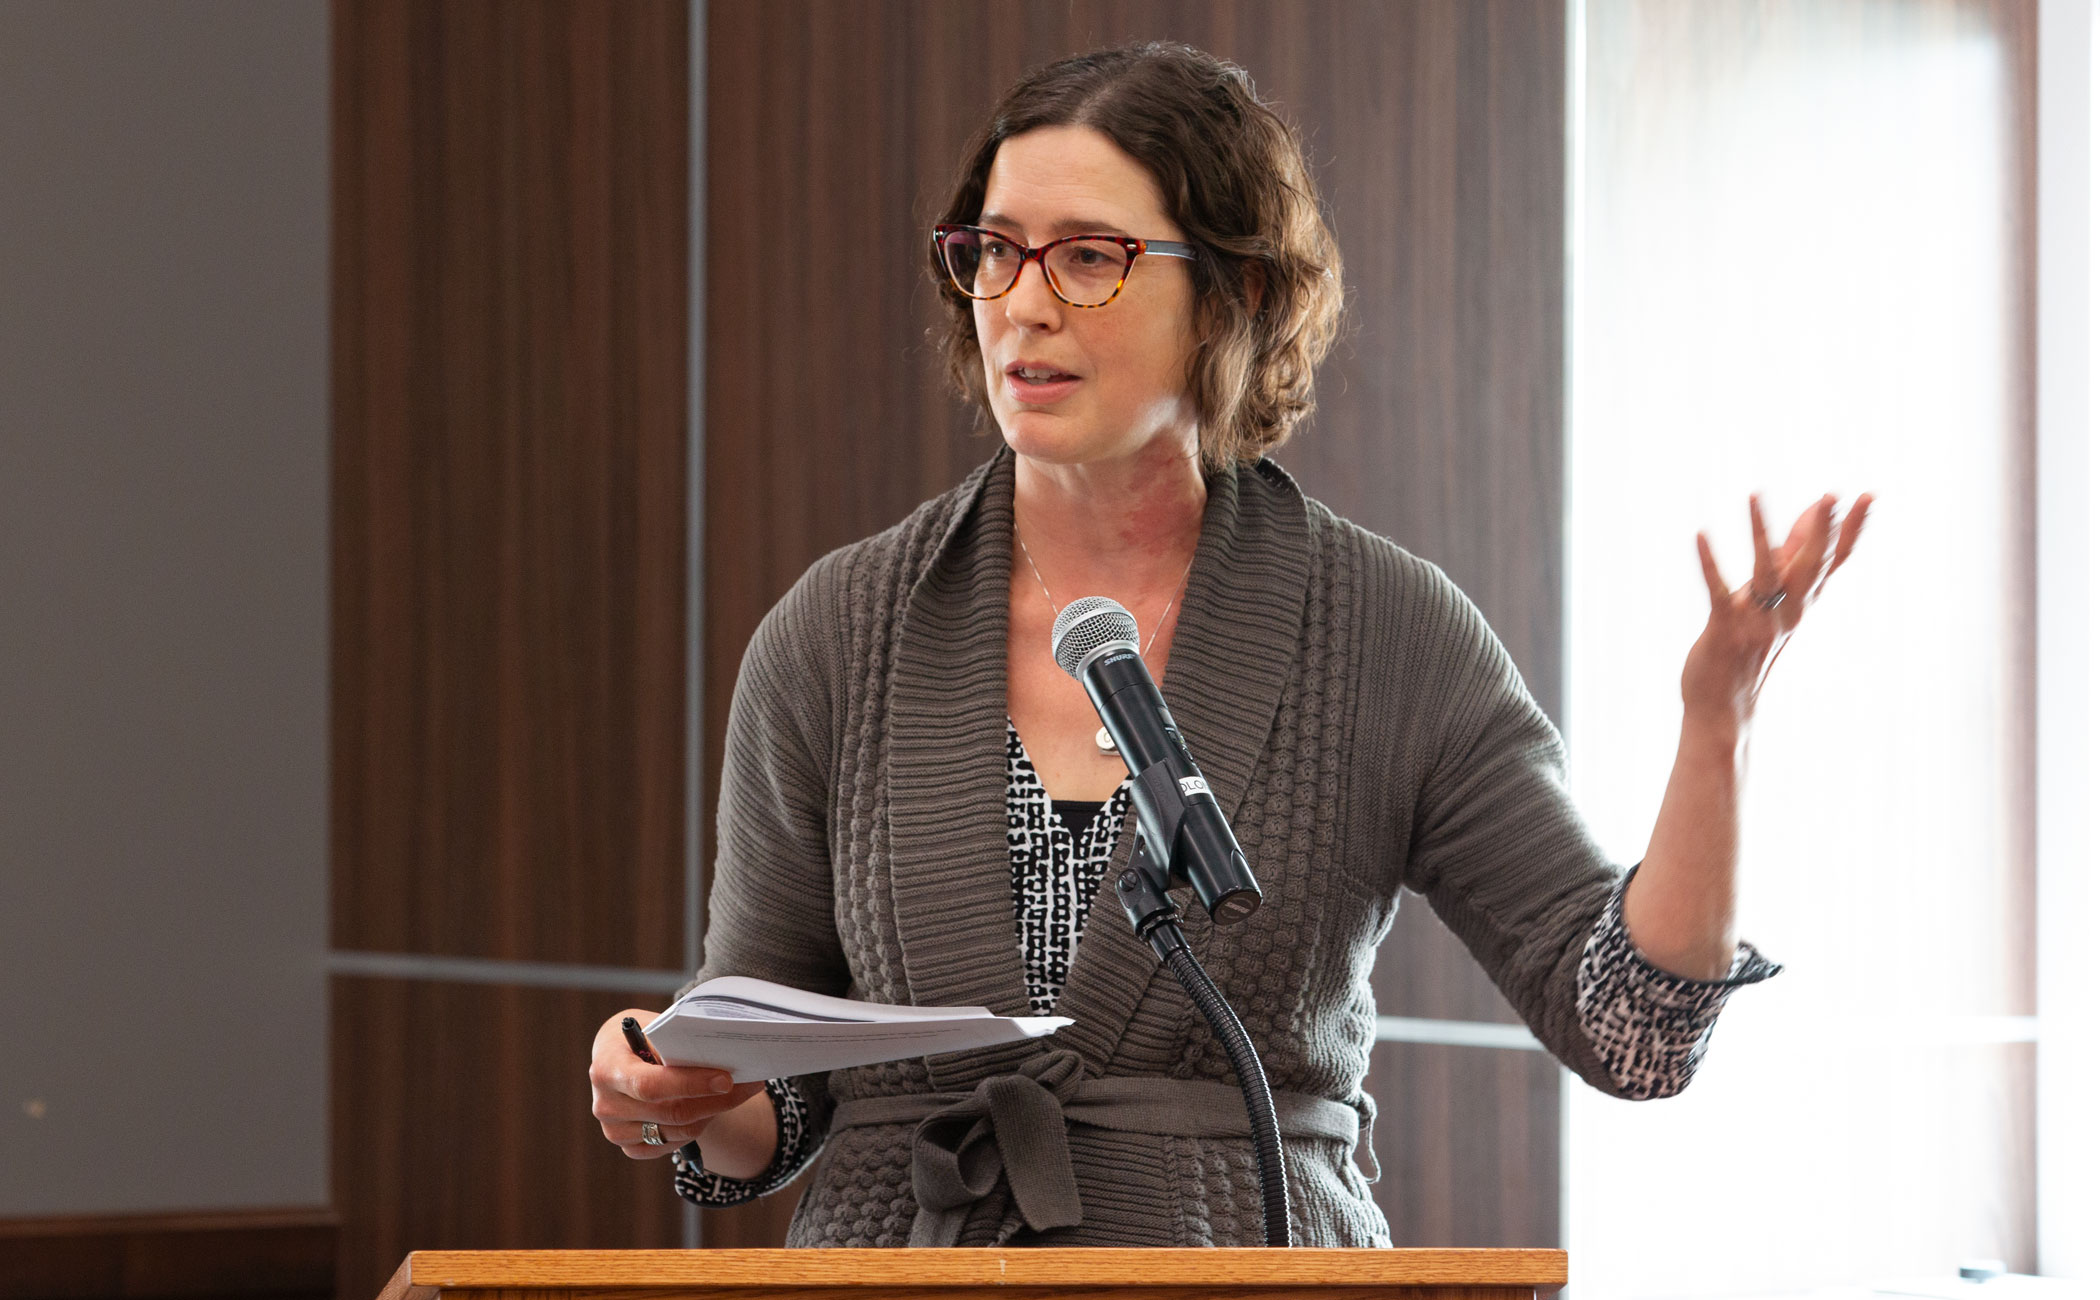 Erica DeFrain, University Libraries assistant professor, answers a question about making research data publicly available during an Oct. 29 NAECR Knowledge event.